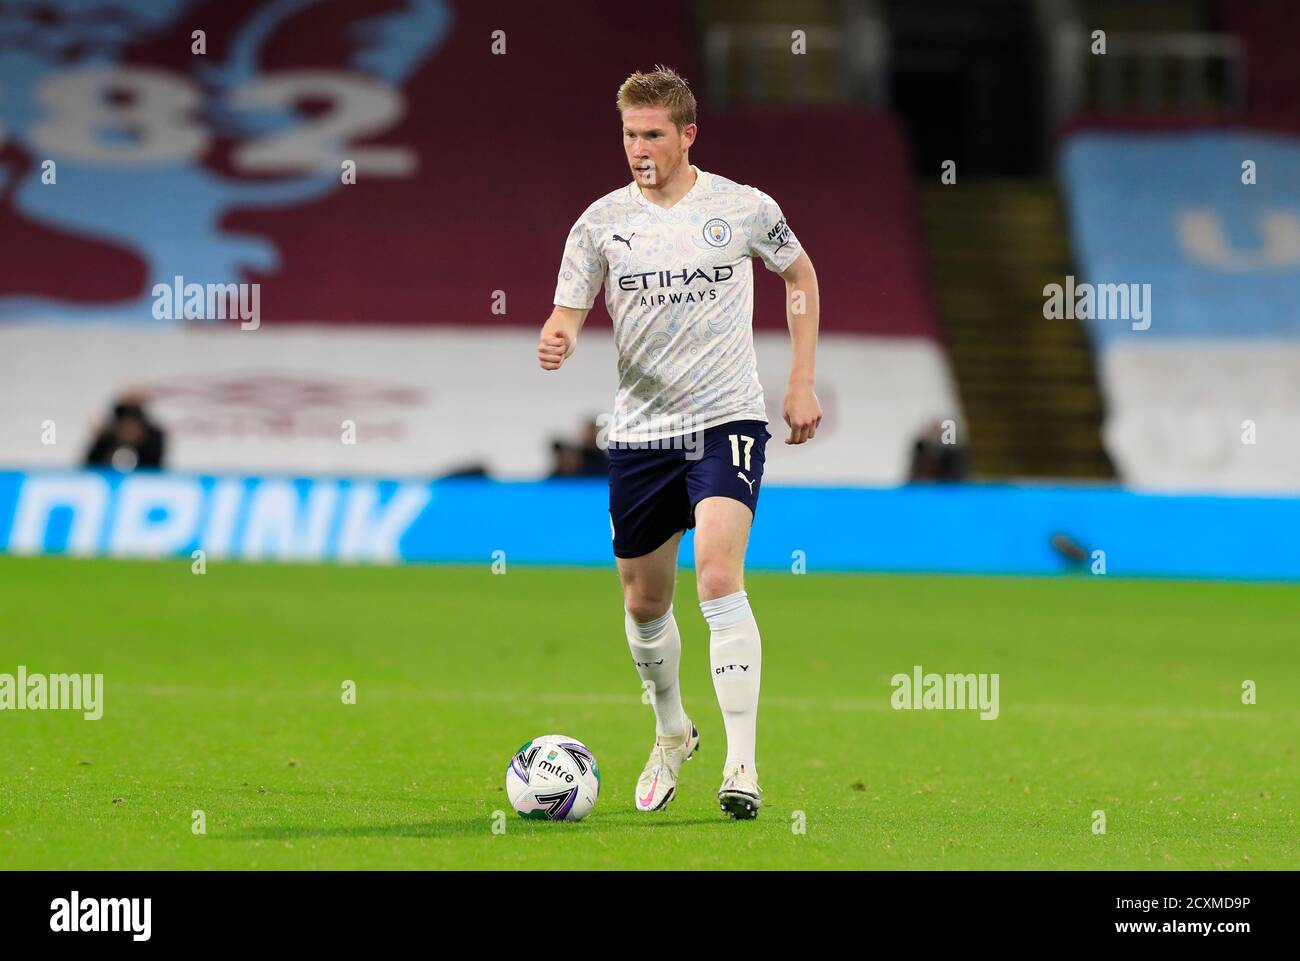 Kevin De Bruyne (17) of Manchester City Stock Photo